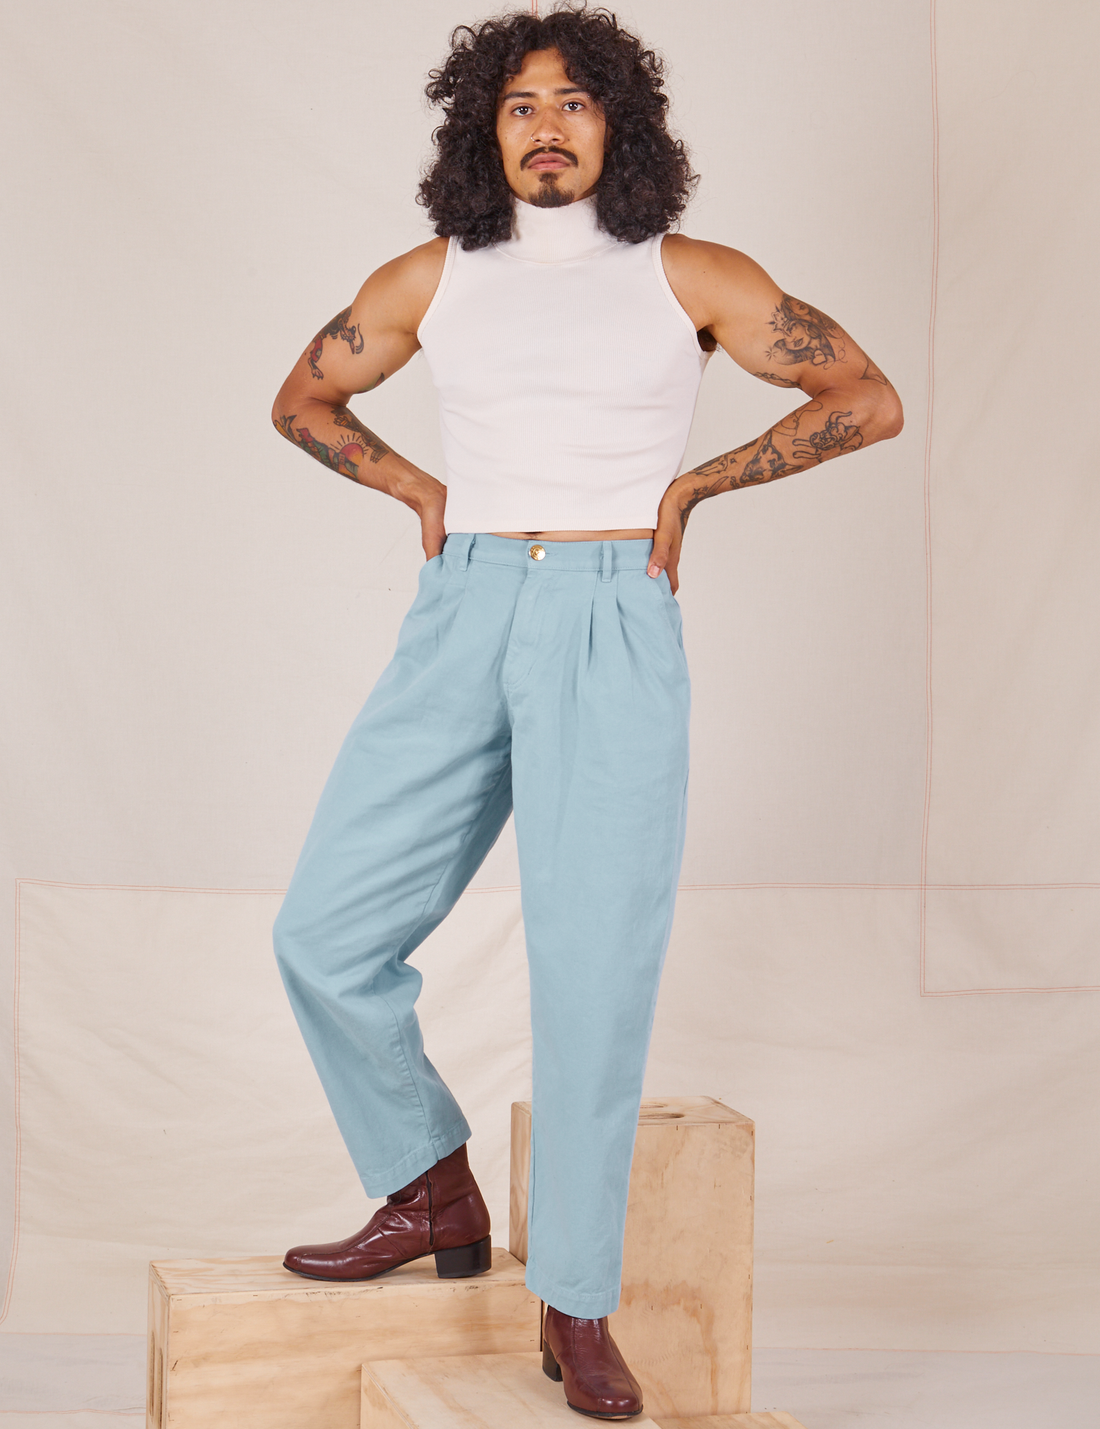 Jesse is 5'8" and wearing XXS Heavyweight Trousers in Baby Blue paired with vintage off-white Sleeveless Turtleneck